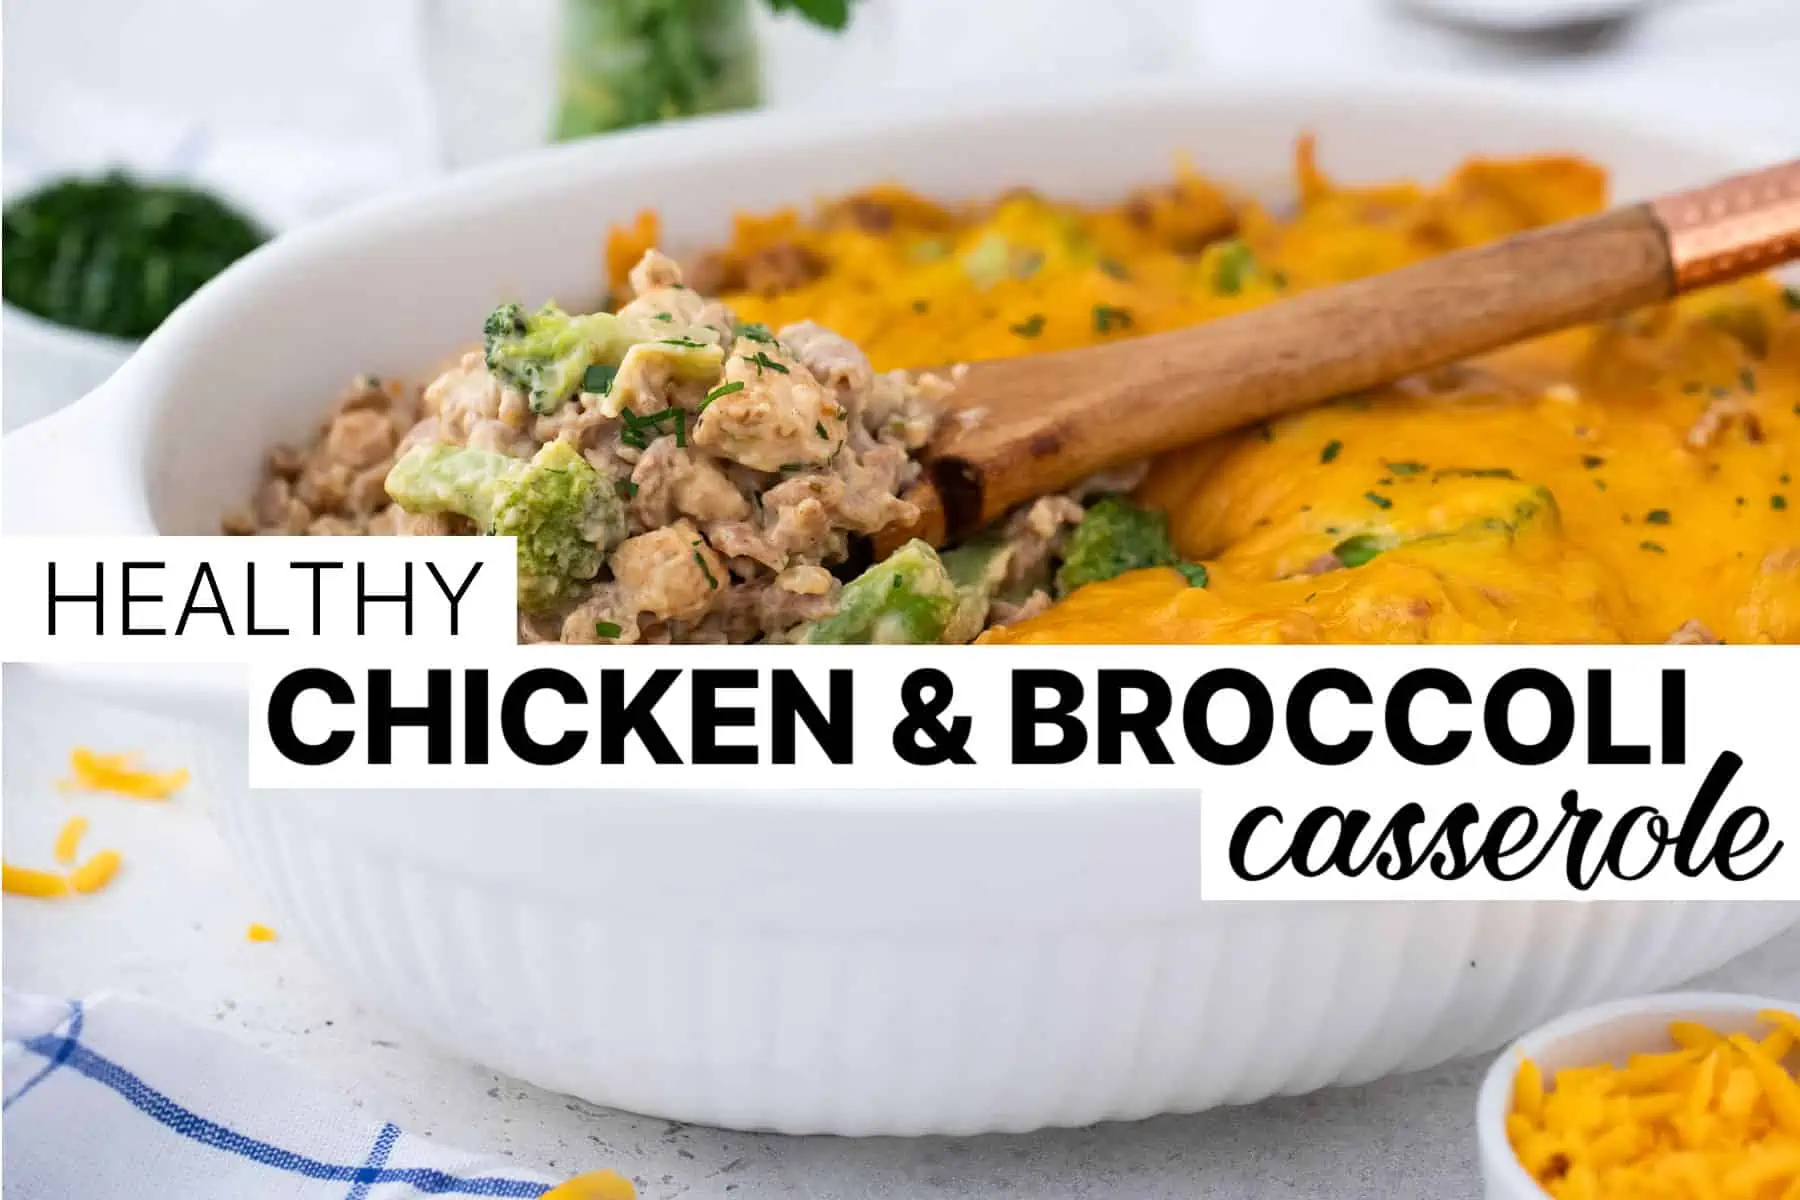 Baked casserole with text overlay saying Healthy Chicken and Broccoli Casserole